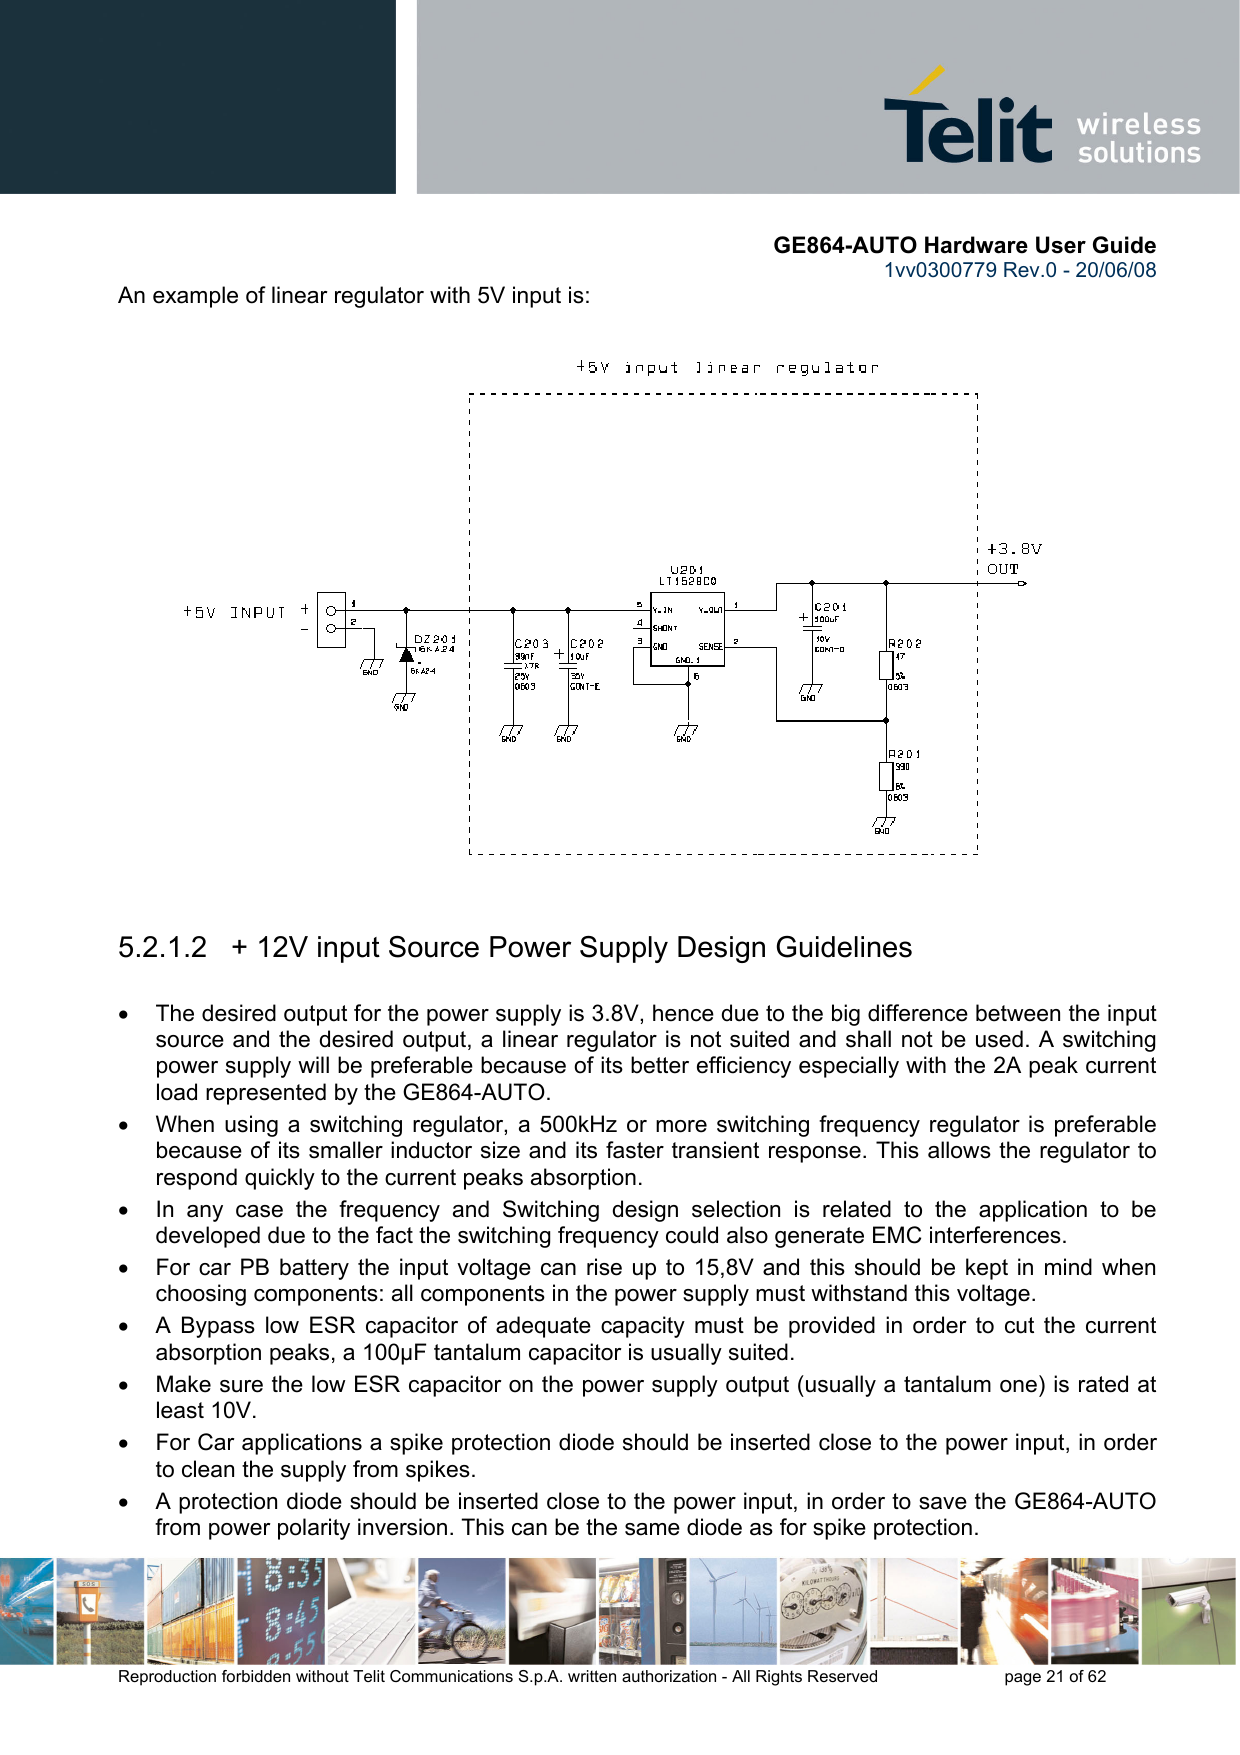       GE864-AUTO Hardware User Guide 1vv0300779 Rev.0 - 20/06/08      Reproduction forbidden without Telit Communications S.p.A. written authorization - All Rights Reserved    page 21 of 62  An example of linear regulator with 5V input is:    5.2.1.2   + 12V input Source Power Supply Design Guidelines  •  The desired output for the power supply is 3.8V, hence due to the big difference between the input source and the desired output, a linear regulator is not suited and shall not be used. A switching power supply will be preferable because of its better efficiency especially with the 2A peak current load represented by the GE864-AUTO. •  When using a switching regulator, a 500kHz or more switching frequency regulator is preferable because of its smaller inductor size and its faster transient response. This allows the regulator to respond quickly to the current peaks absorption.  •  In any case the frequency and Switching design selection is related to the application to be developed due to the fact the switching frequency could also generate EMC interferences. •  For car PB battery the input voltage can rise up to 15,8V and this should be kept in mind when choosing components: all components in the power supply must withstand this voltage. •  A Bypass low ESR capacitor of adequate capacity must be provided in order to cut the current absorption peaks, a 100μF tantalum capacitor is usually suited. •  Make sure the low ESR capacitor on the power supply output (usually a tantalum one) is rated at least 10V. •  For Car applications a spike protection diode should be inserted close to the power input, in order to clean the supply from spikes.  •  A protection diode should be inserted close to the power input, in order to save the GE864-AUTO from power polarity inversion. This can be the same diode as for spike protection. 